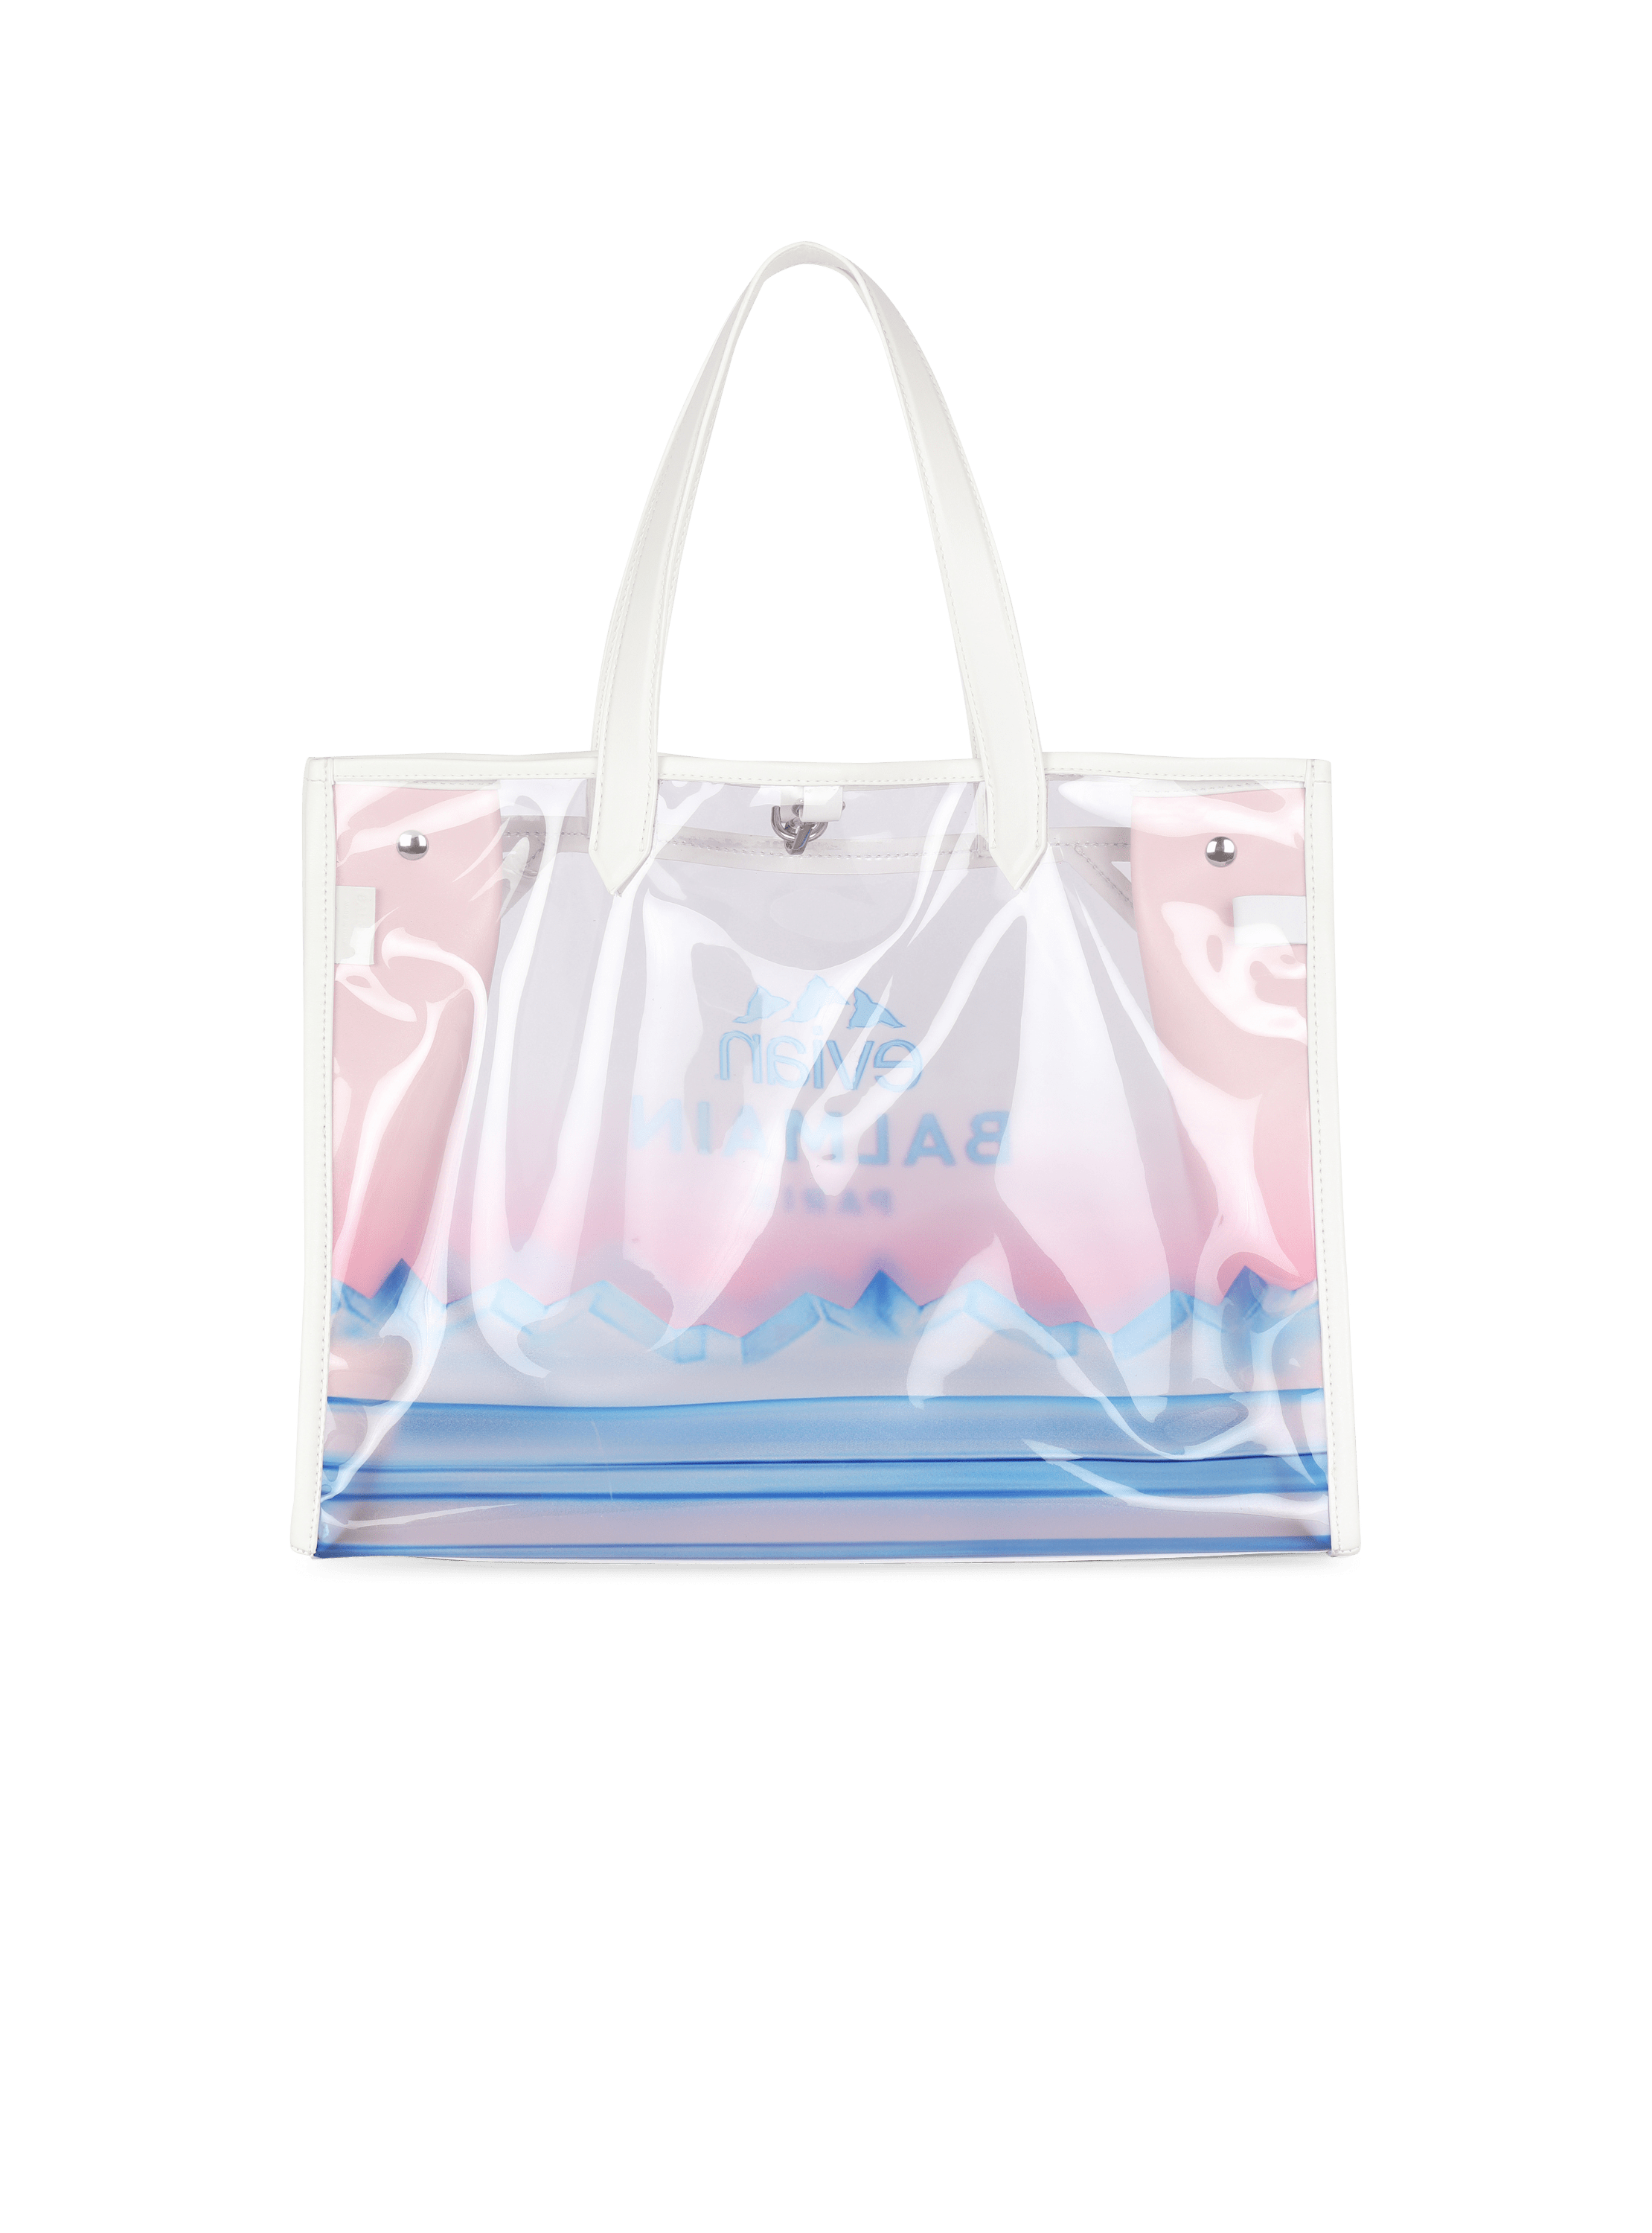 Balmain x Evian - B-Army 42 tote bag in recycled PVC multicolor